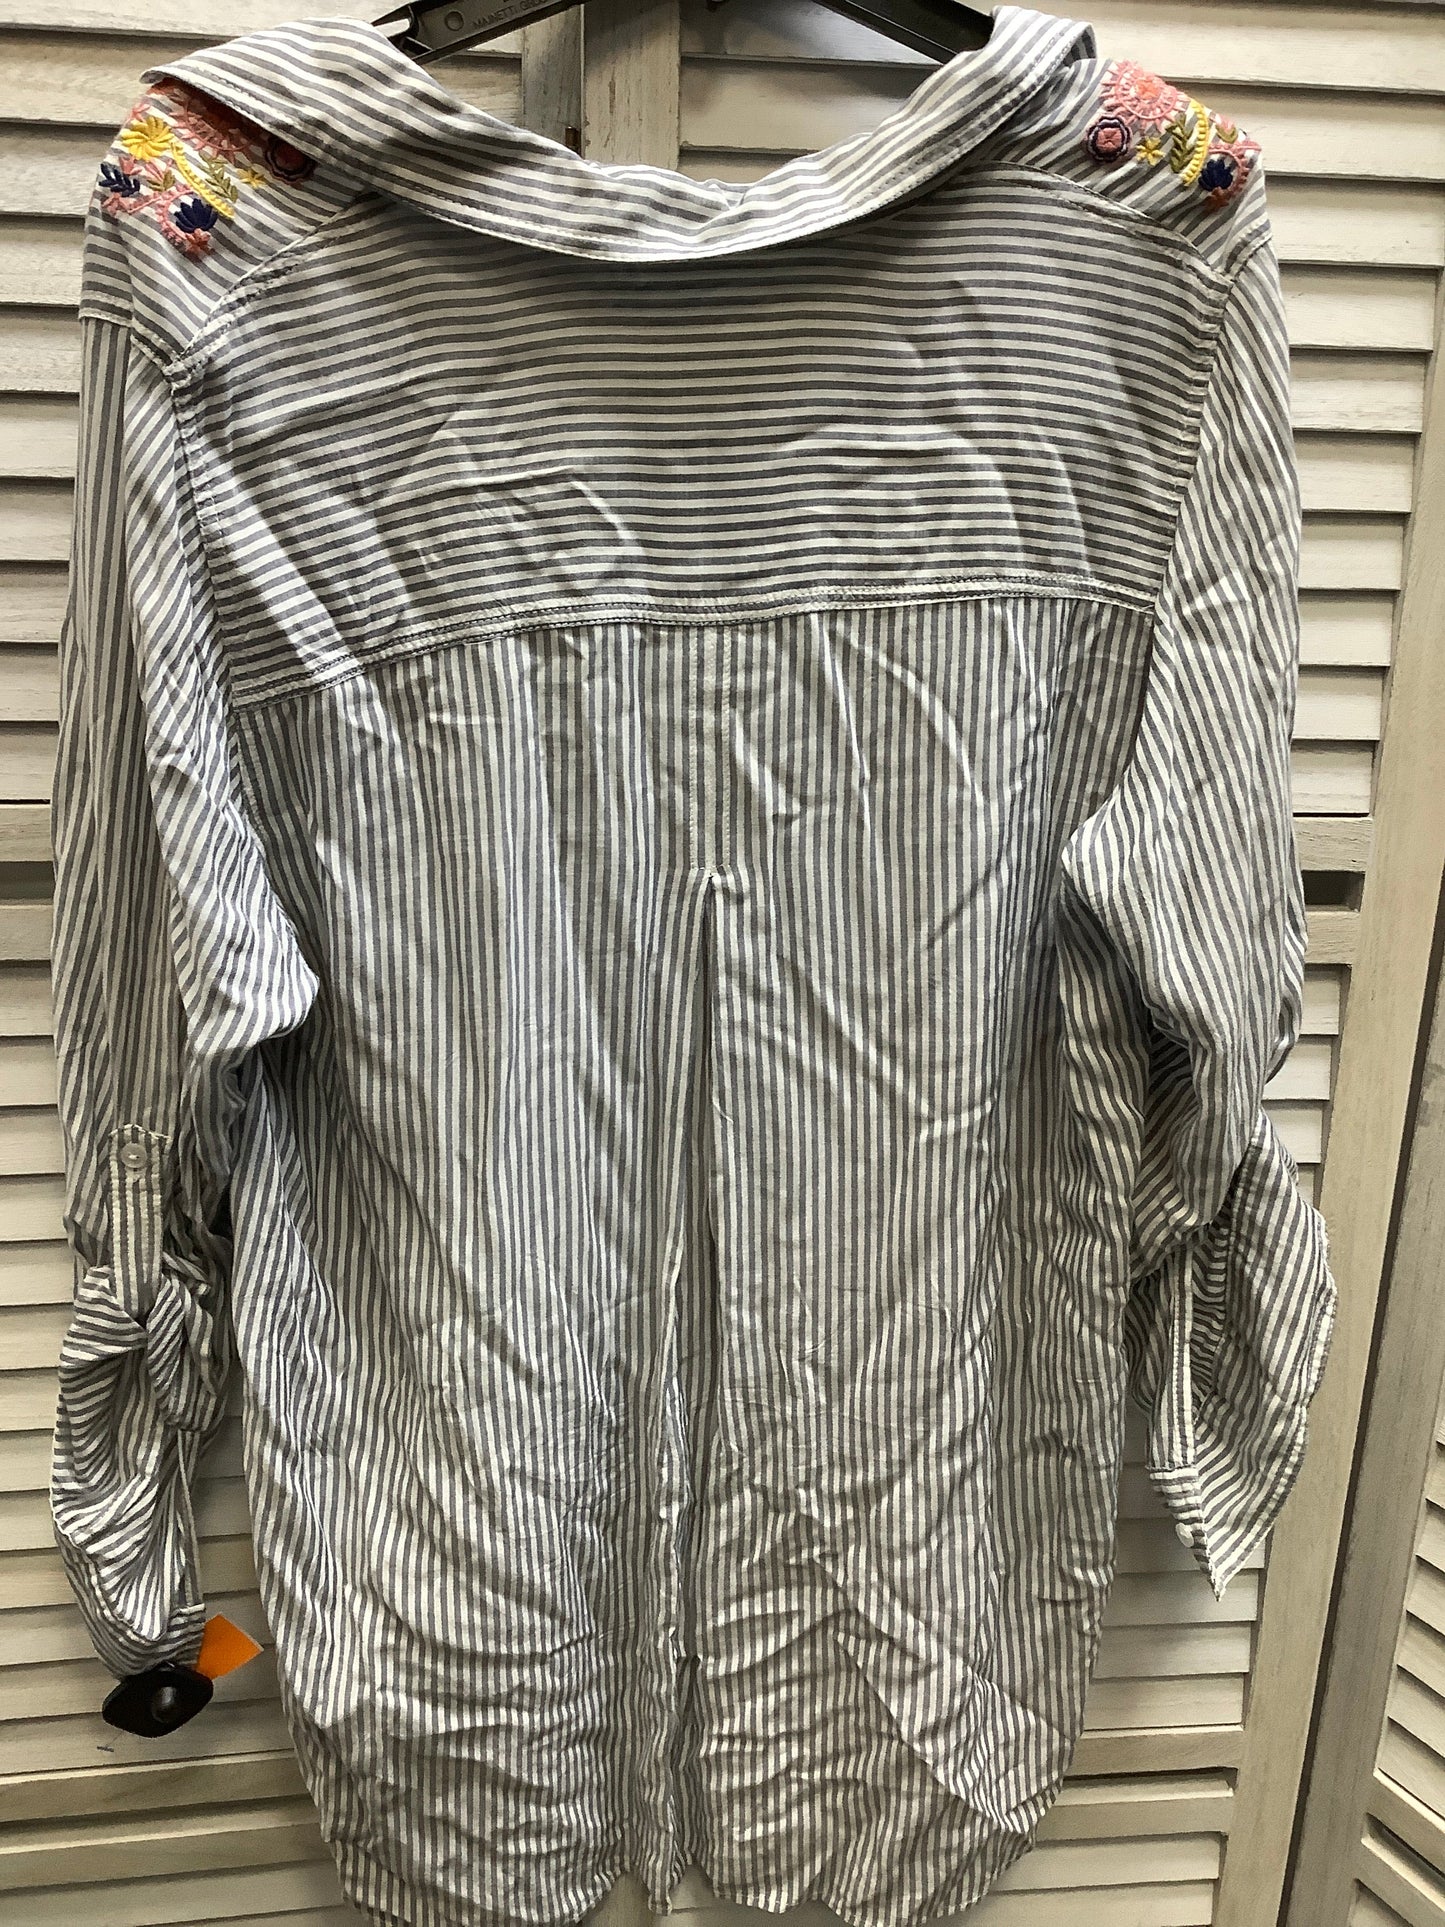 Striped Top Long Sleeve Clothes Mentor, Size Xl